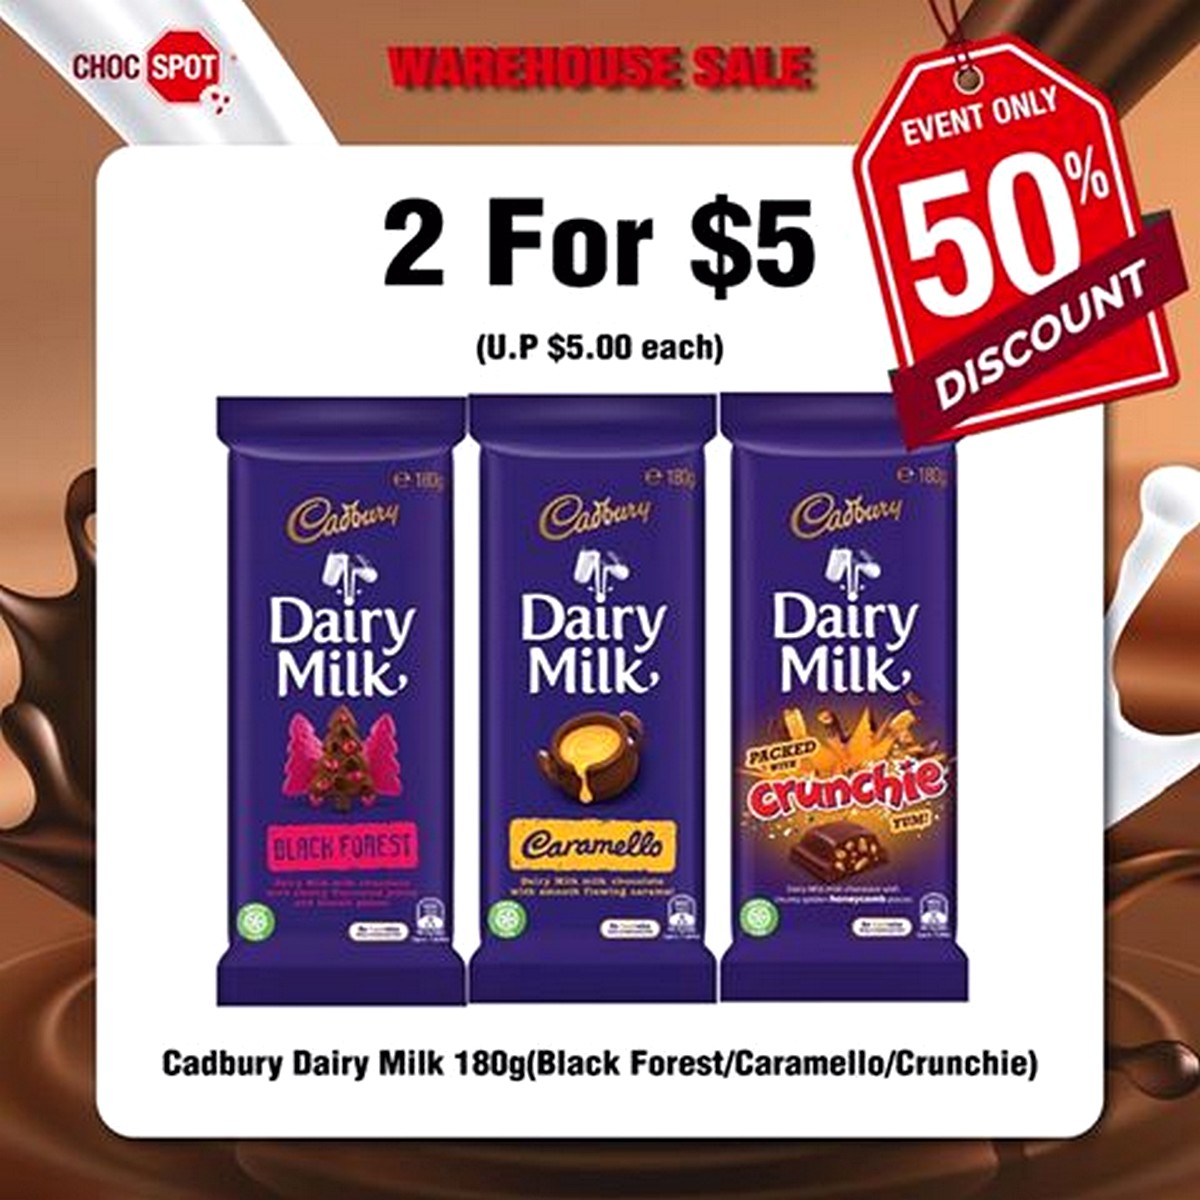 Choc-Spot-Warehouse-Sale-Highlights-003 24 Jul-2 Aug 2020: Choc Spot Warehouse Sale! Up to 80% off Chocolates, Sweets, Chips, Biscuits!